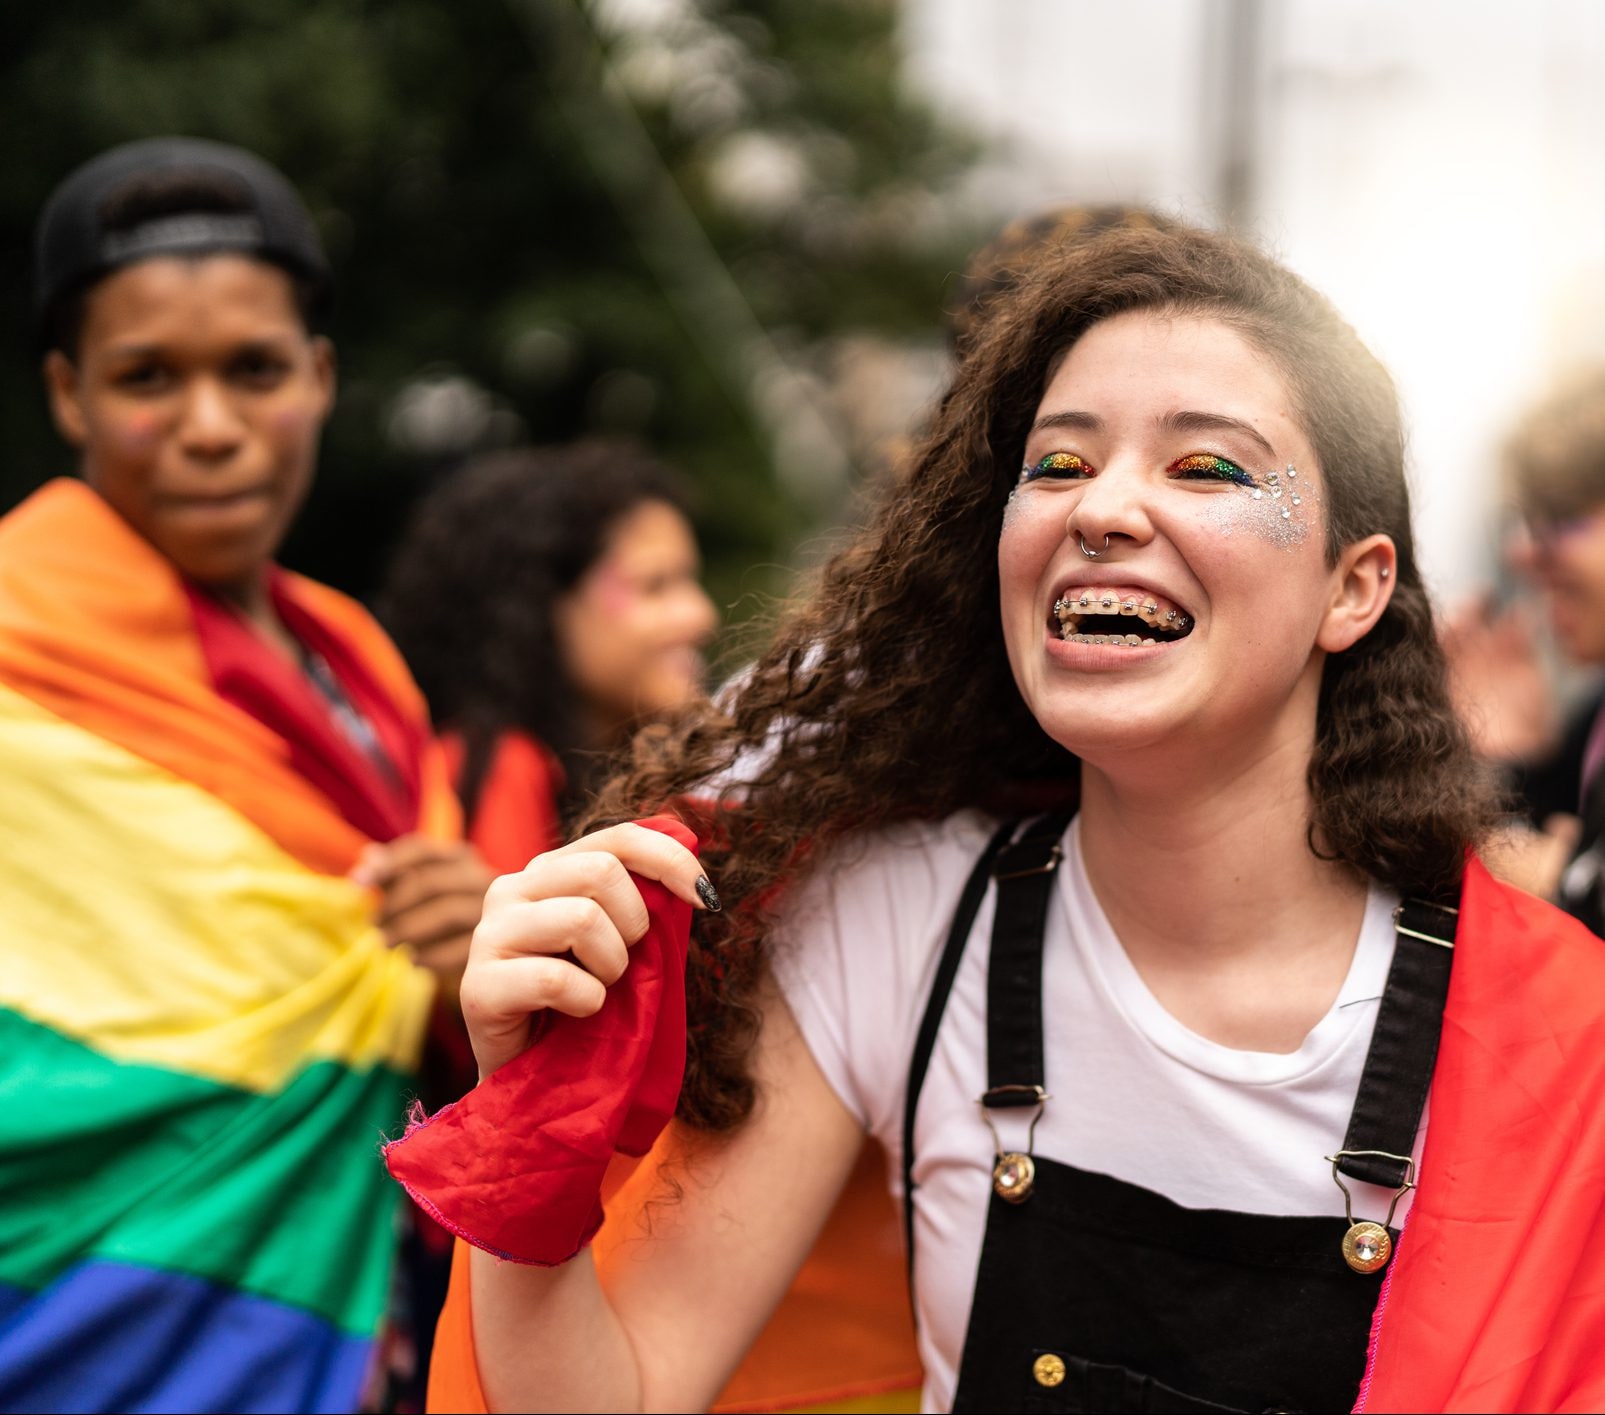 Portrait of smiling Lesbian Young Woman on a LGBTQ parade